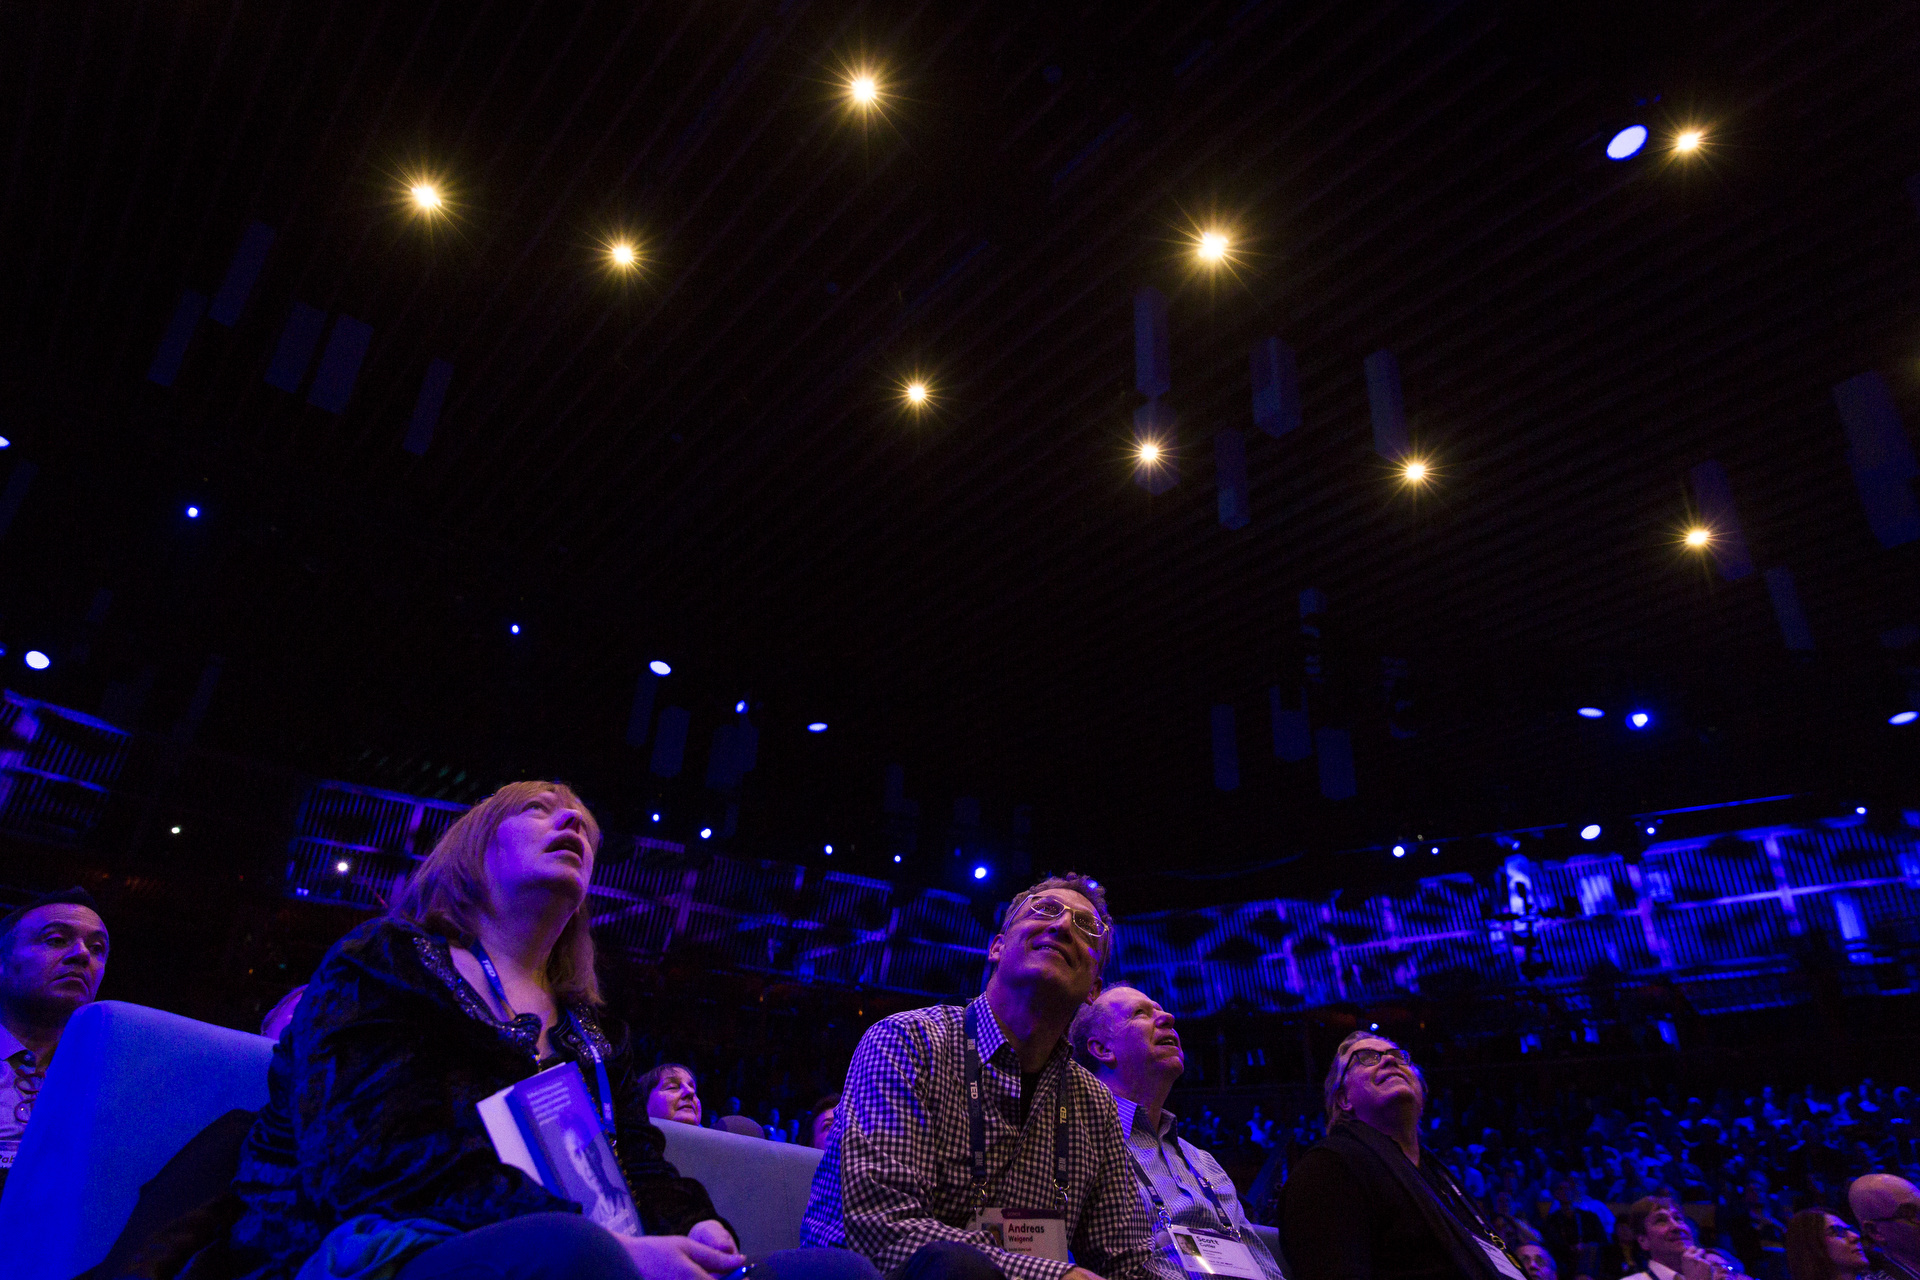 In Case You Missed It: Lessons learned during the third day of TED2016